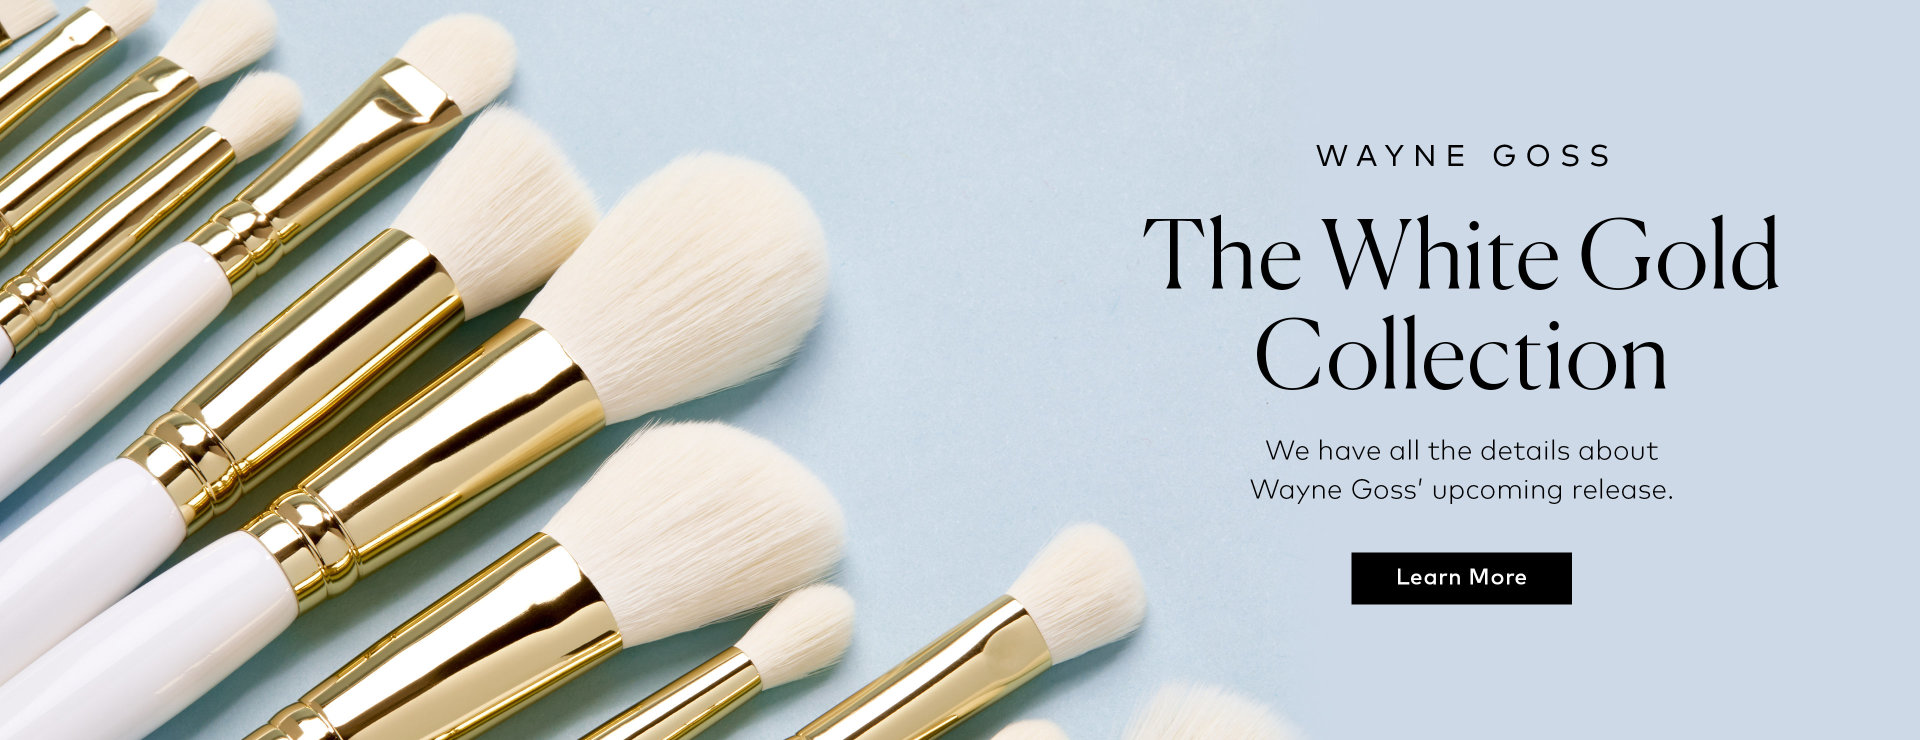 Ready to upgrade your brush collection tomorrow? We have all the details about Wayne Goss' upcoming release.